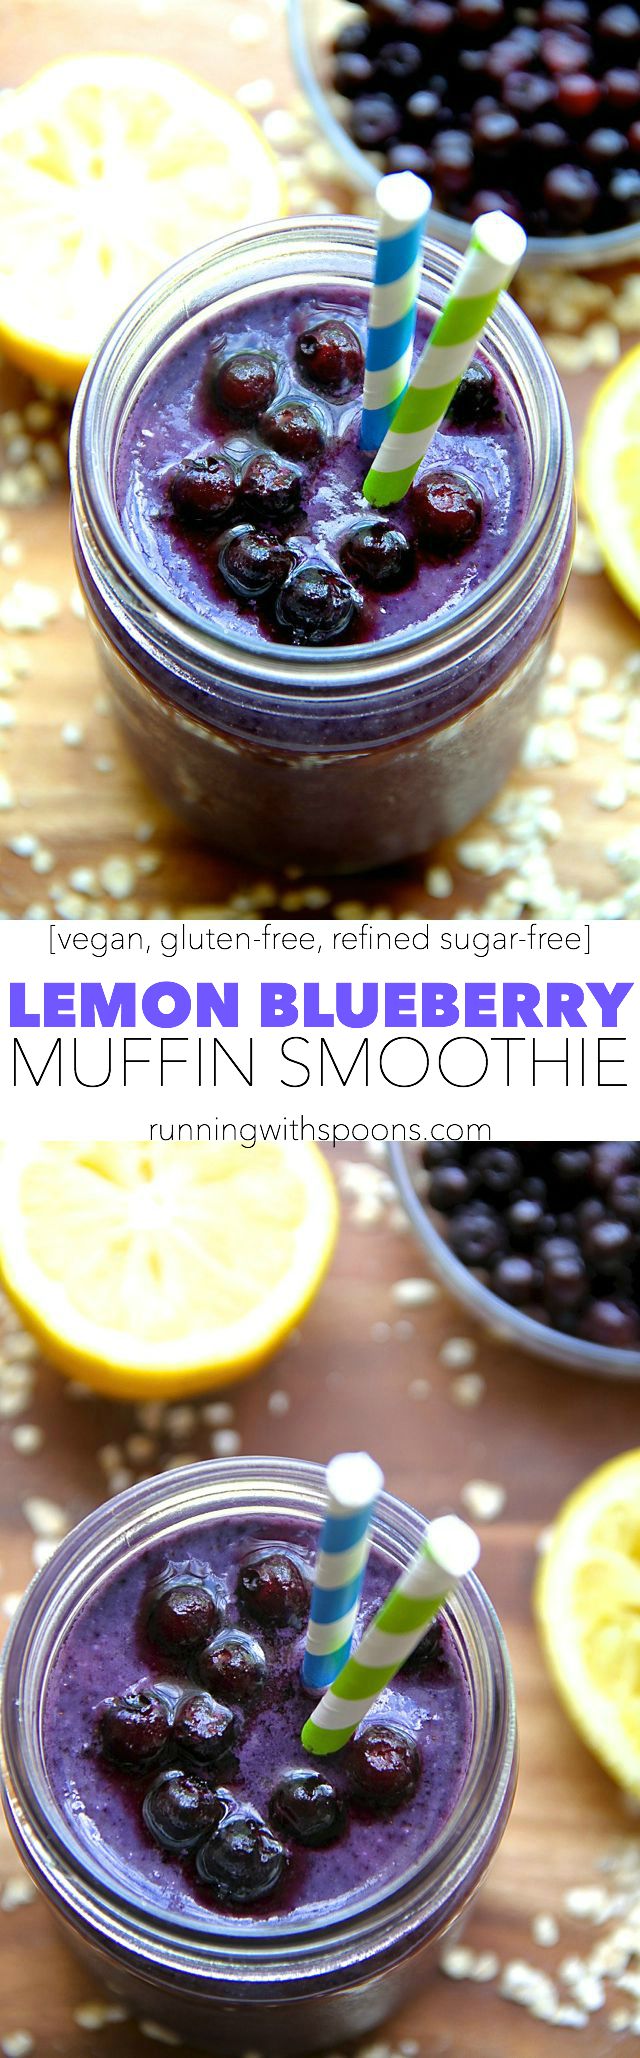 Lemon Blueberry Muffin Smoothie -- cool, creamy, and comforting thanks to the addition of a special ingredient! || runningwithspoons.com #vegan #healthy